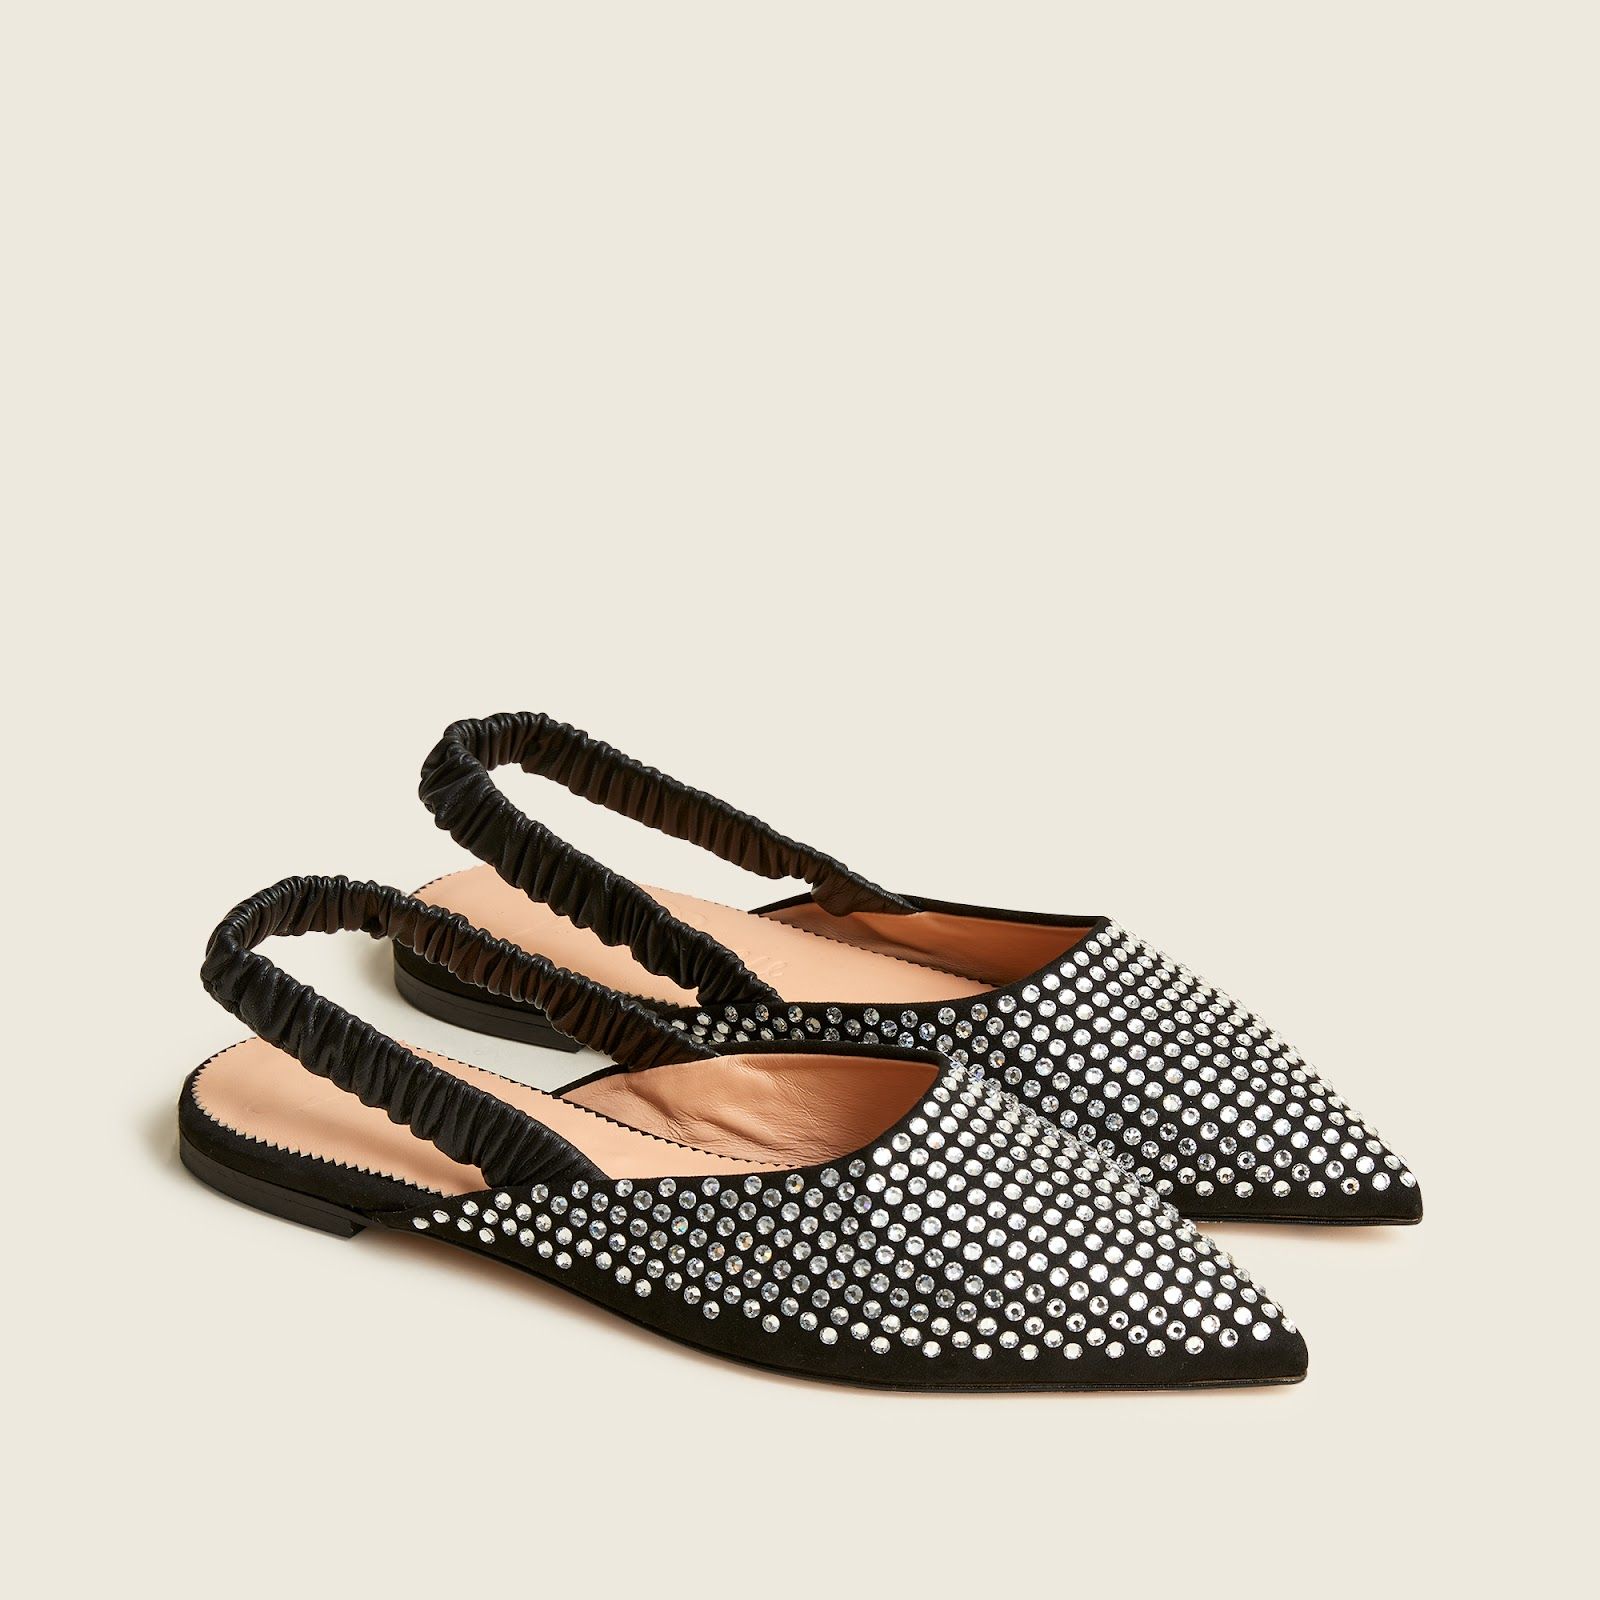 Crystal stretchy slingback mules